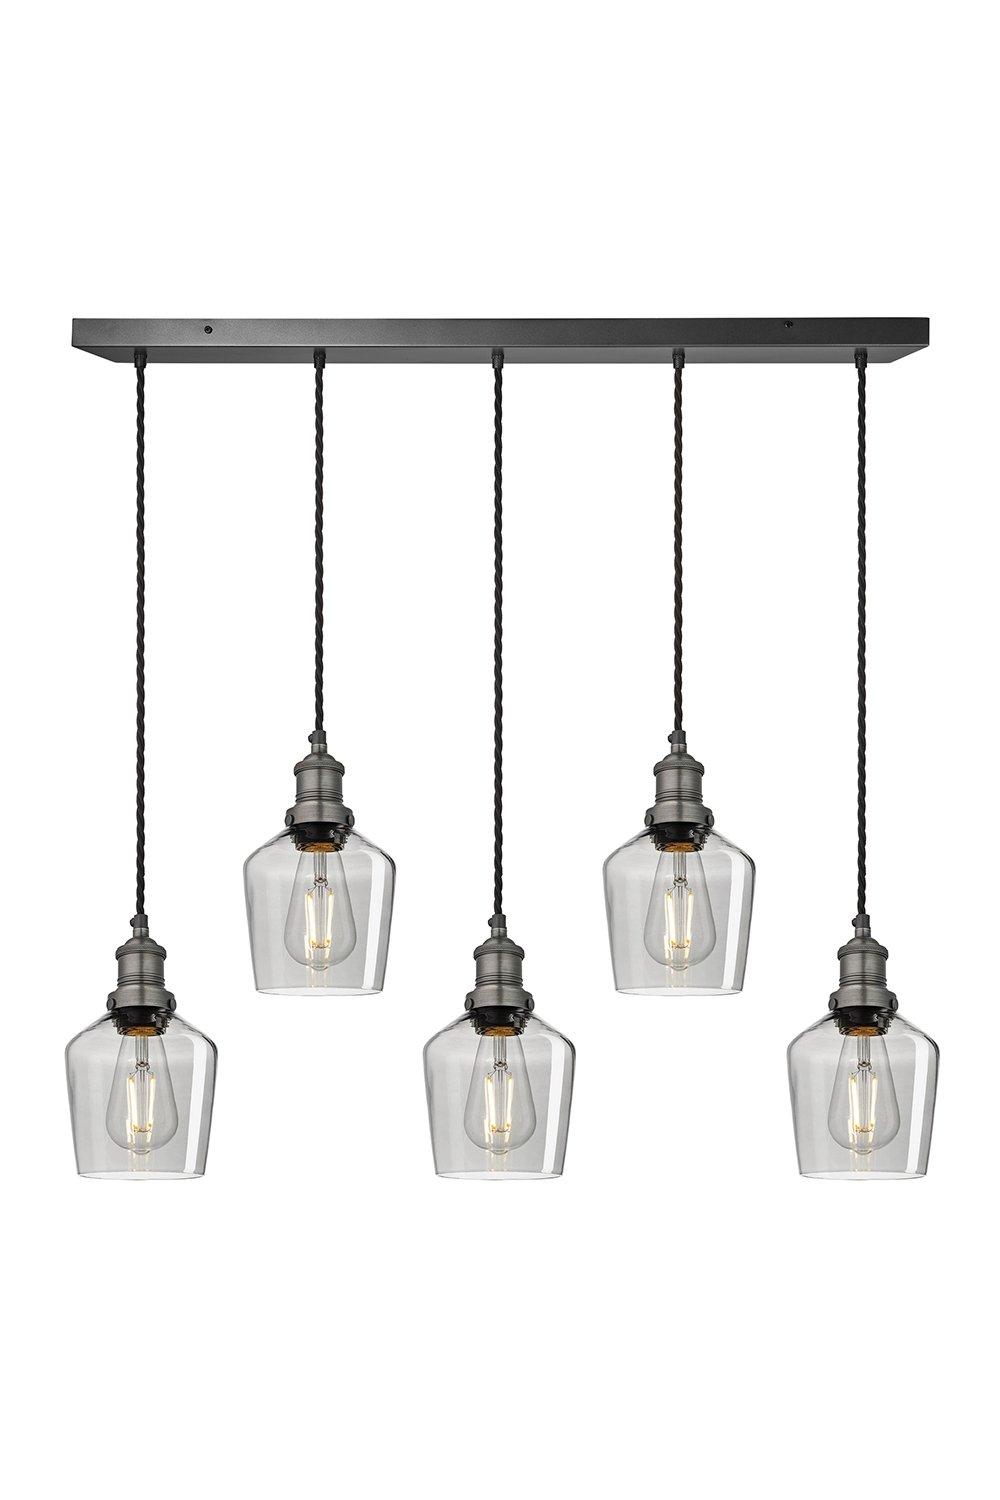 Brooklyn Tinted Glass Schoolhouse 5 Wire Cluster Lights, 5.5 inch, Smoke Grey, Pewter holder